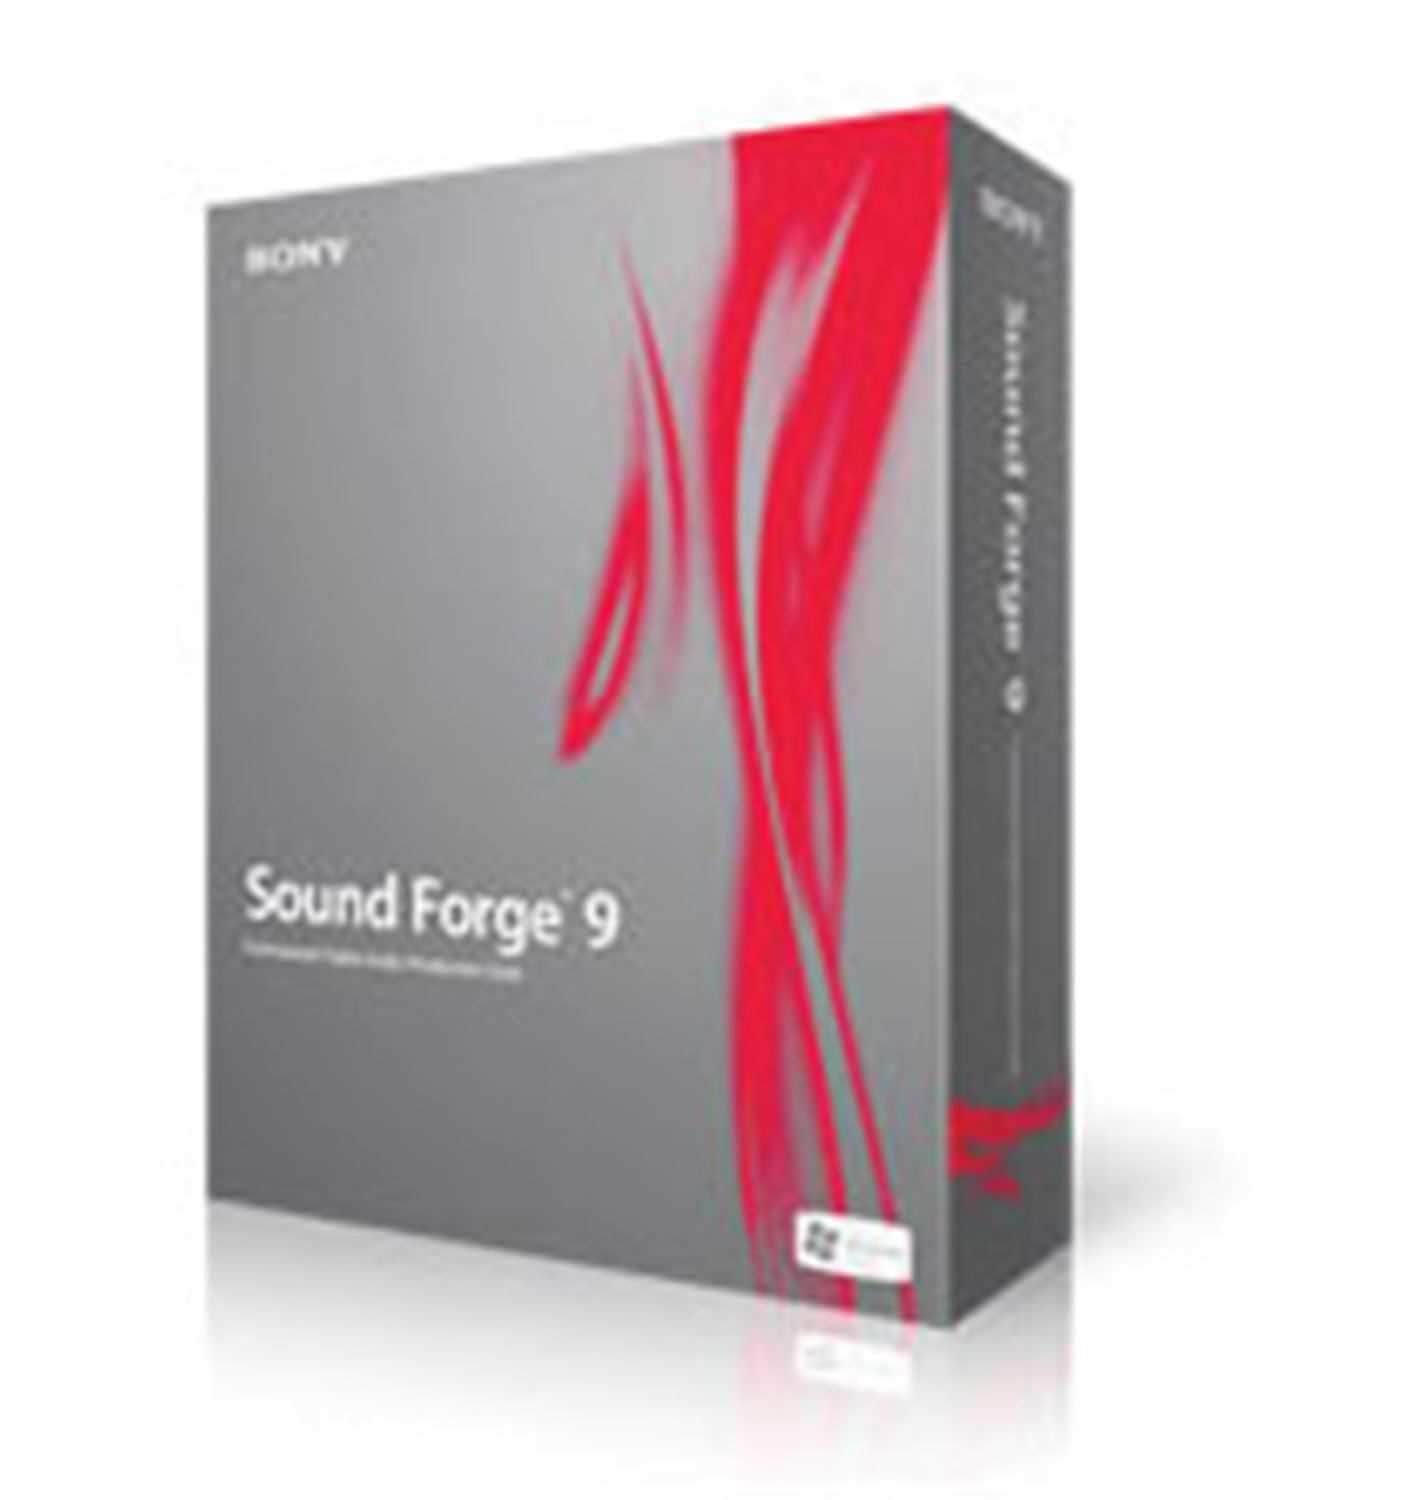 sound forge 8 error while authentication